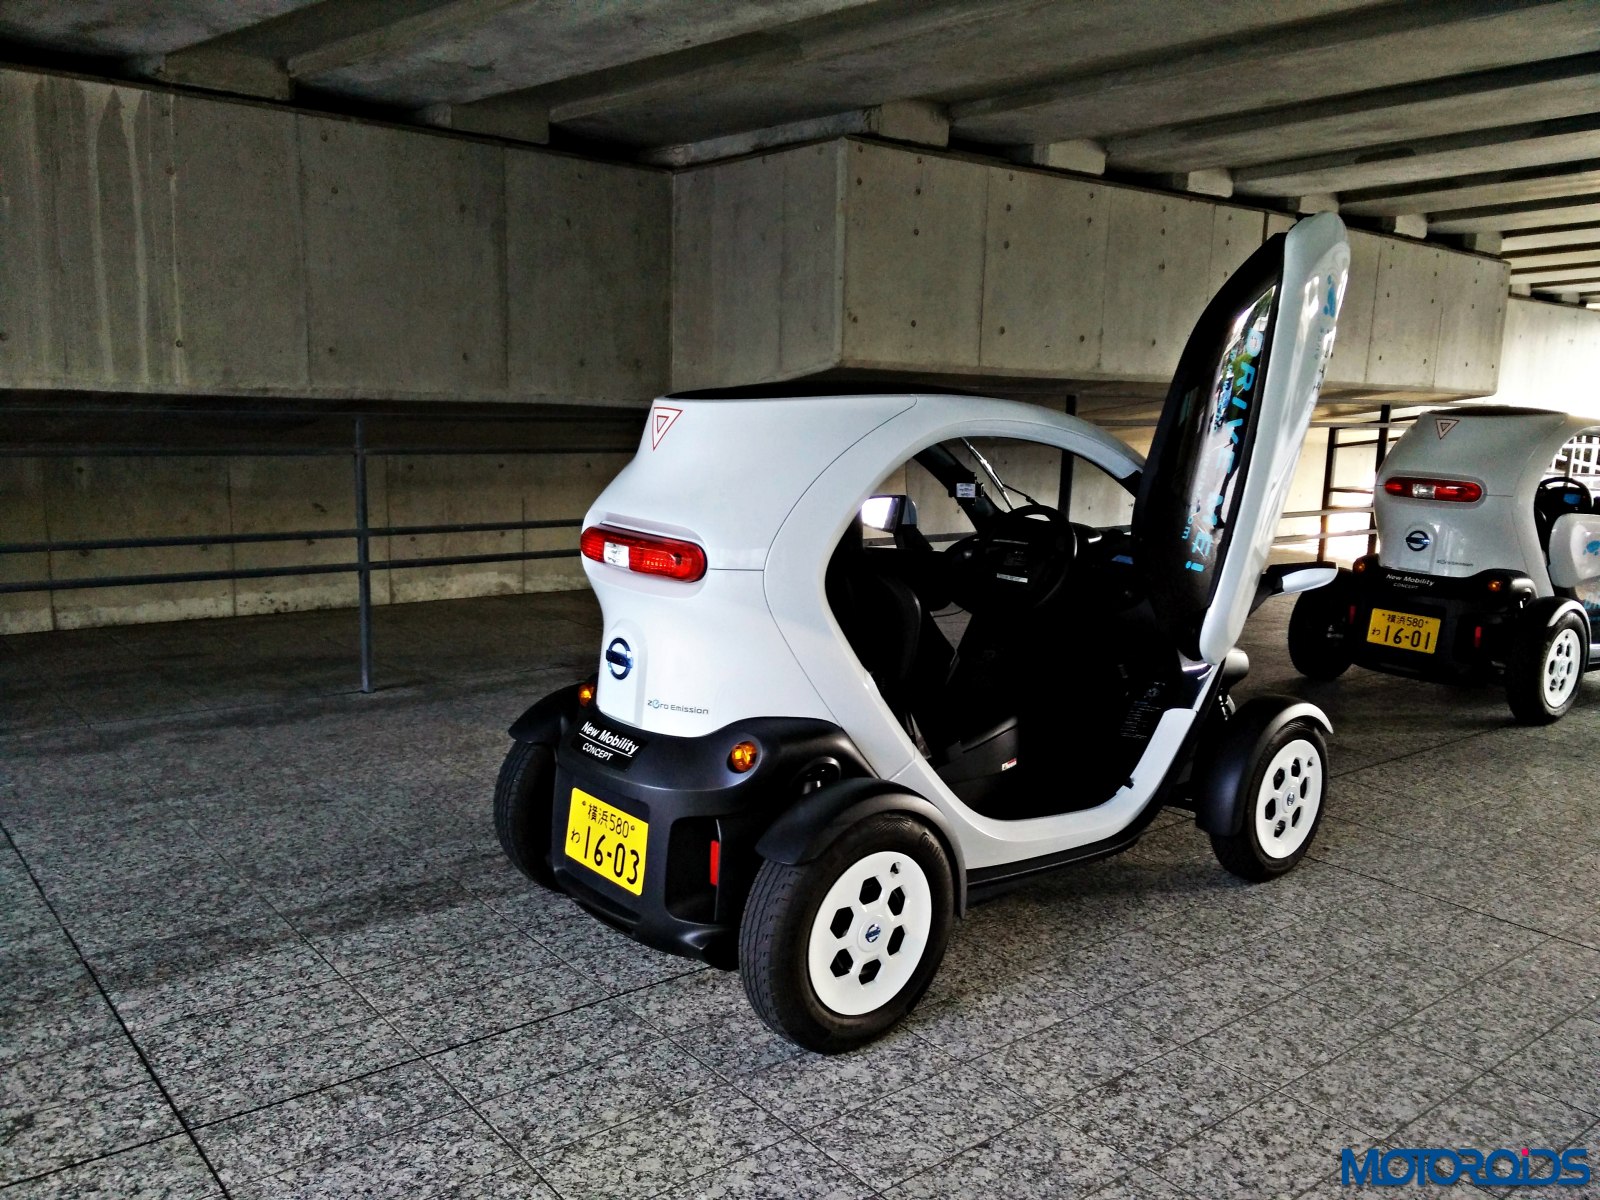 Nissan personal mobility vehicle concept #8